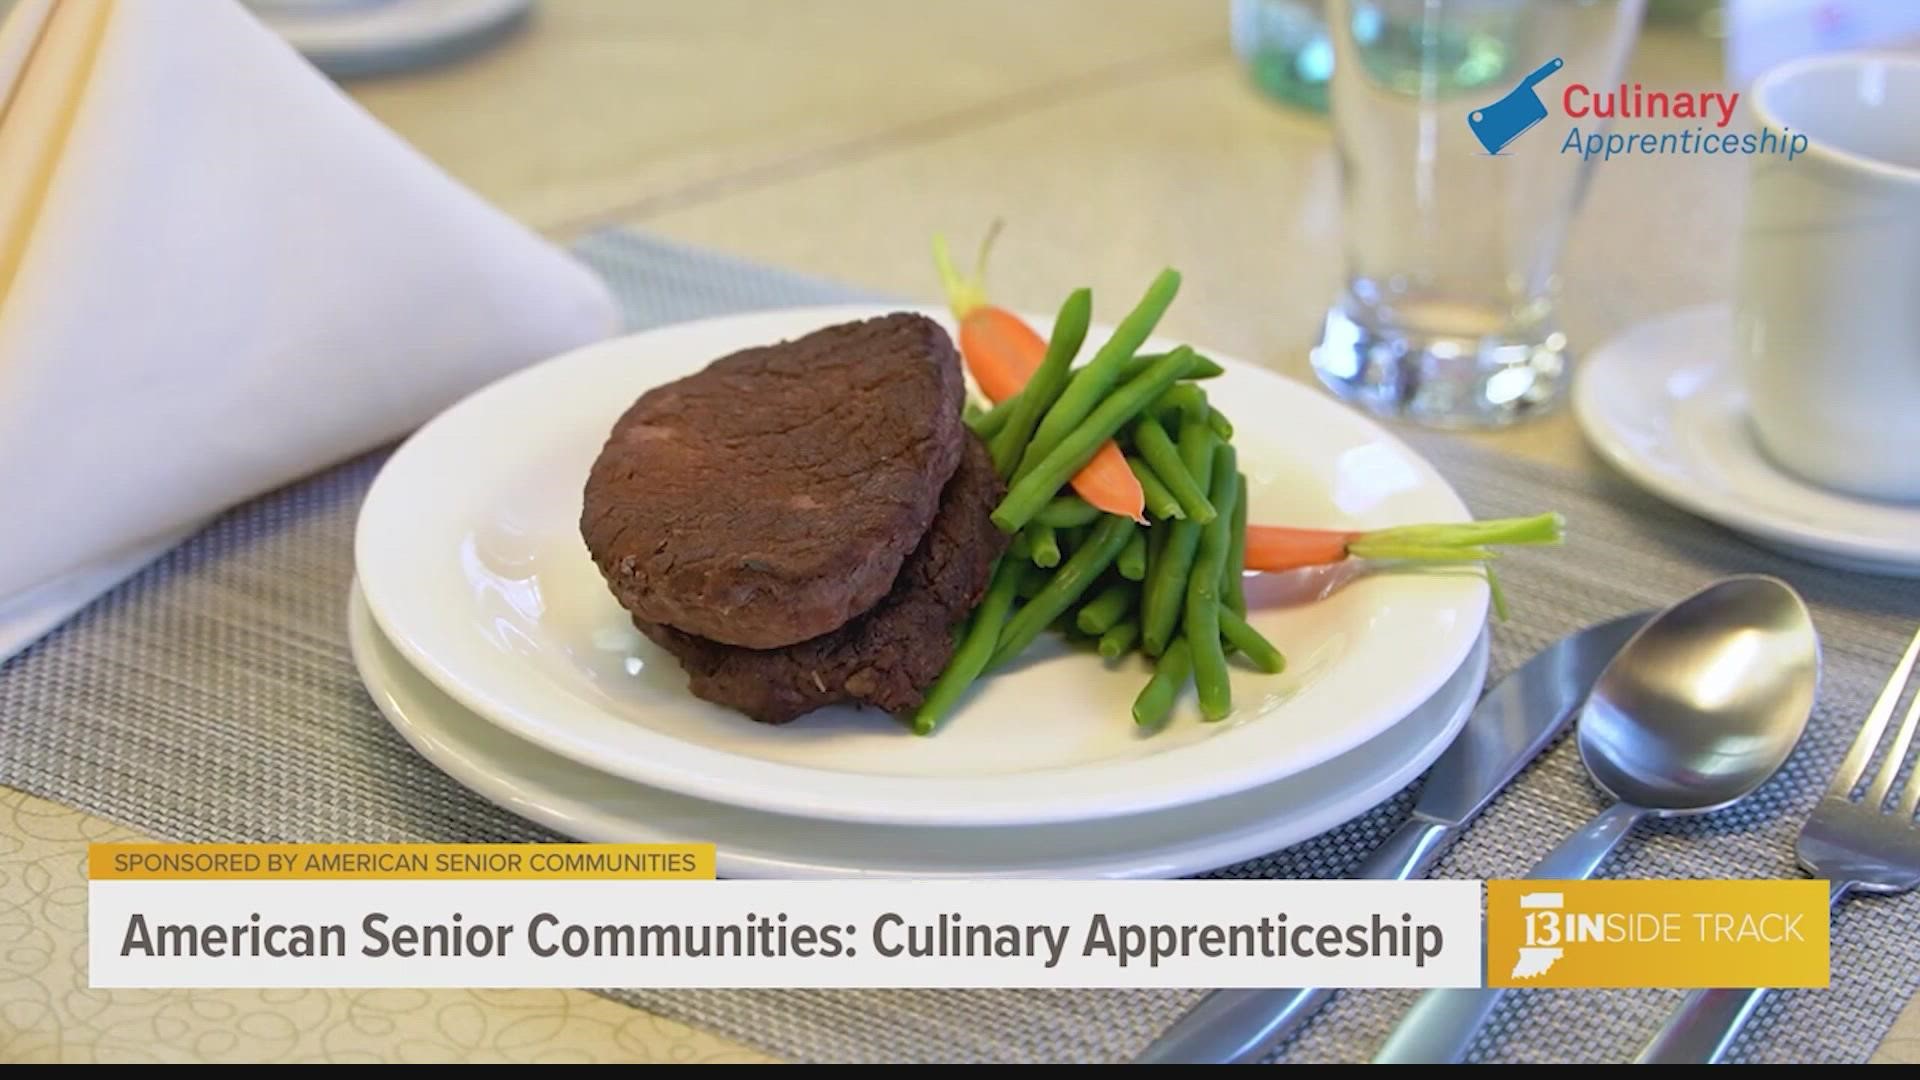 Further your culinary skills with a paid apprenticeship through American Senior Community’s culinary apprenticeship program